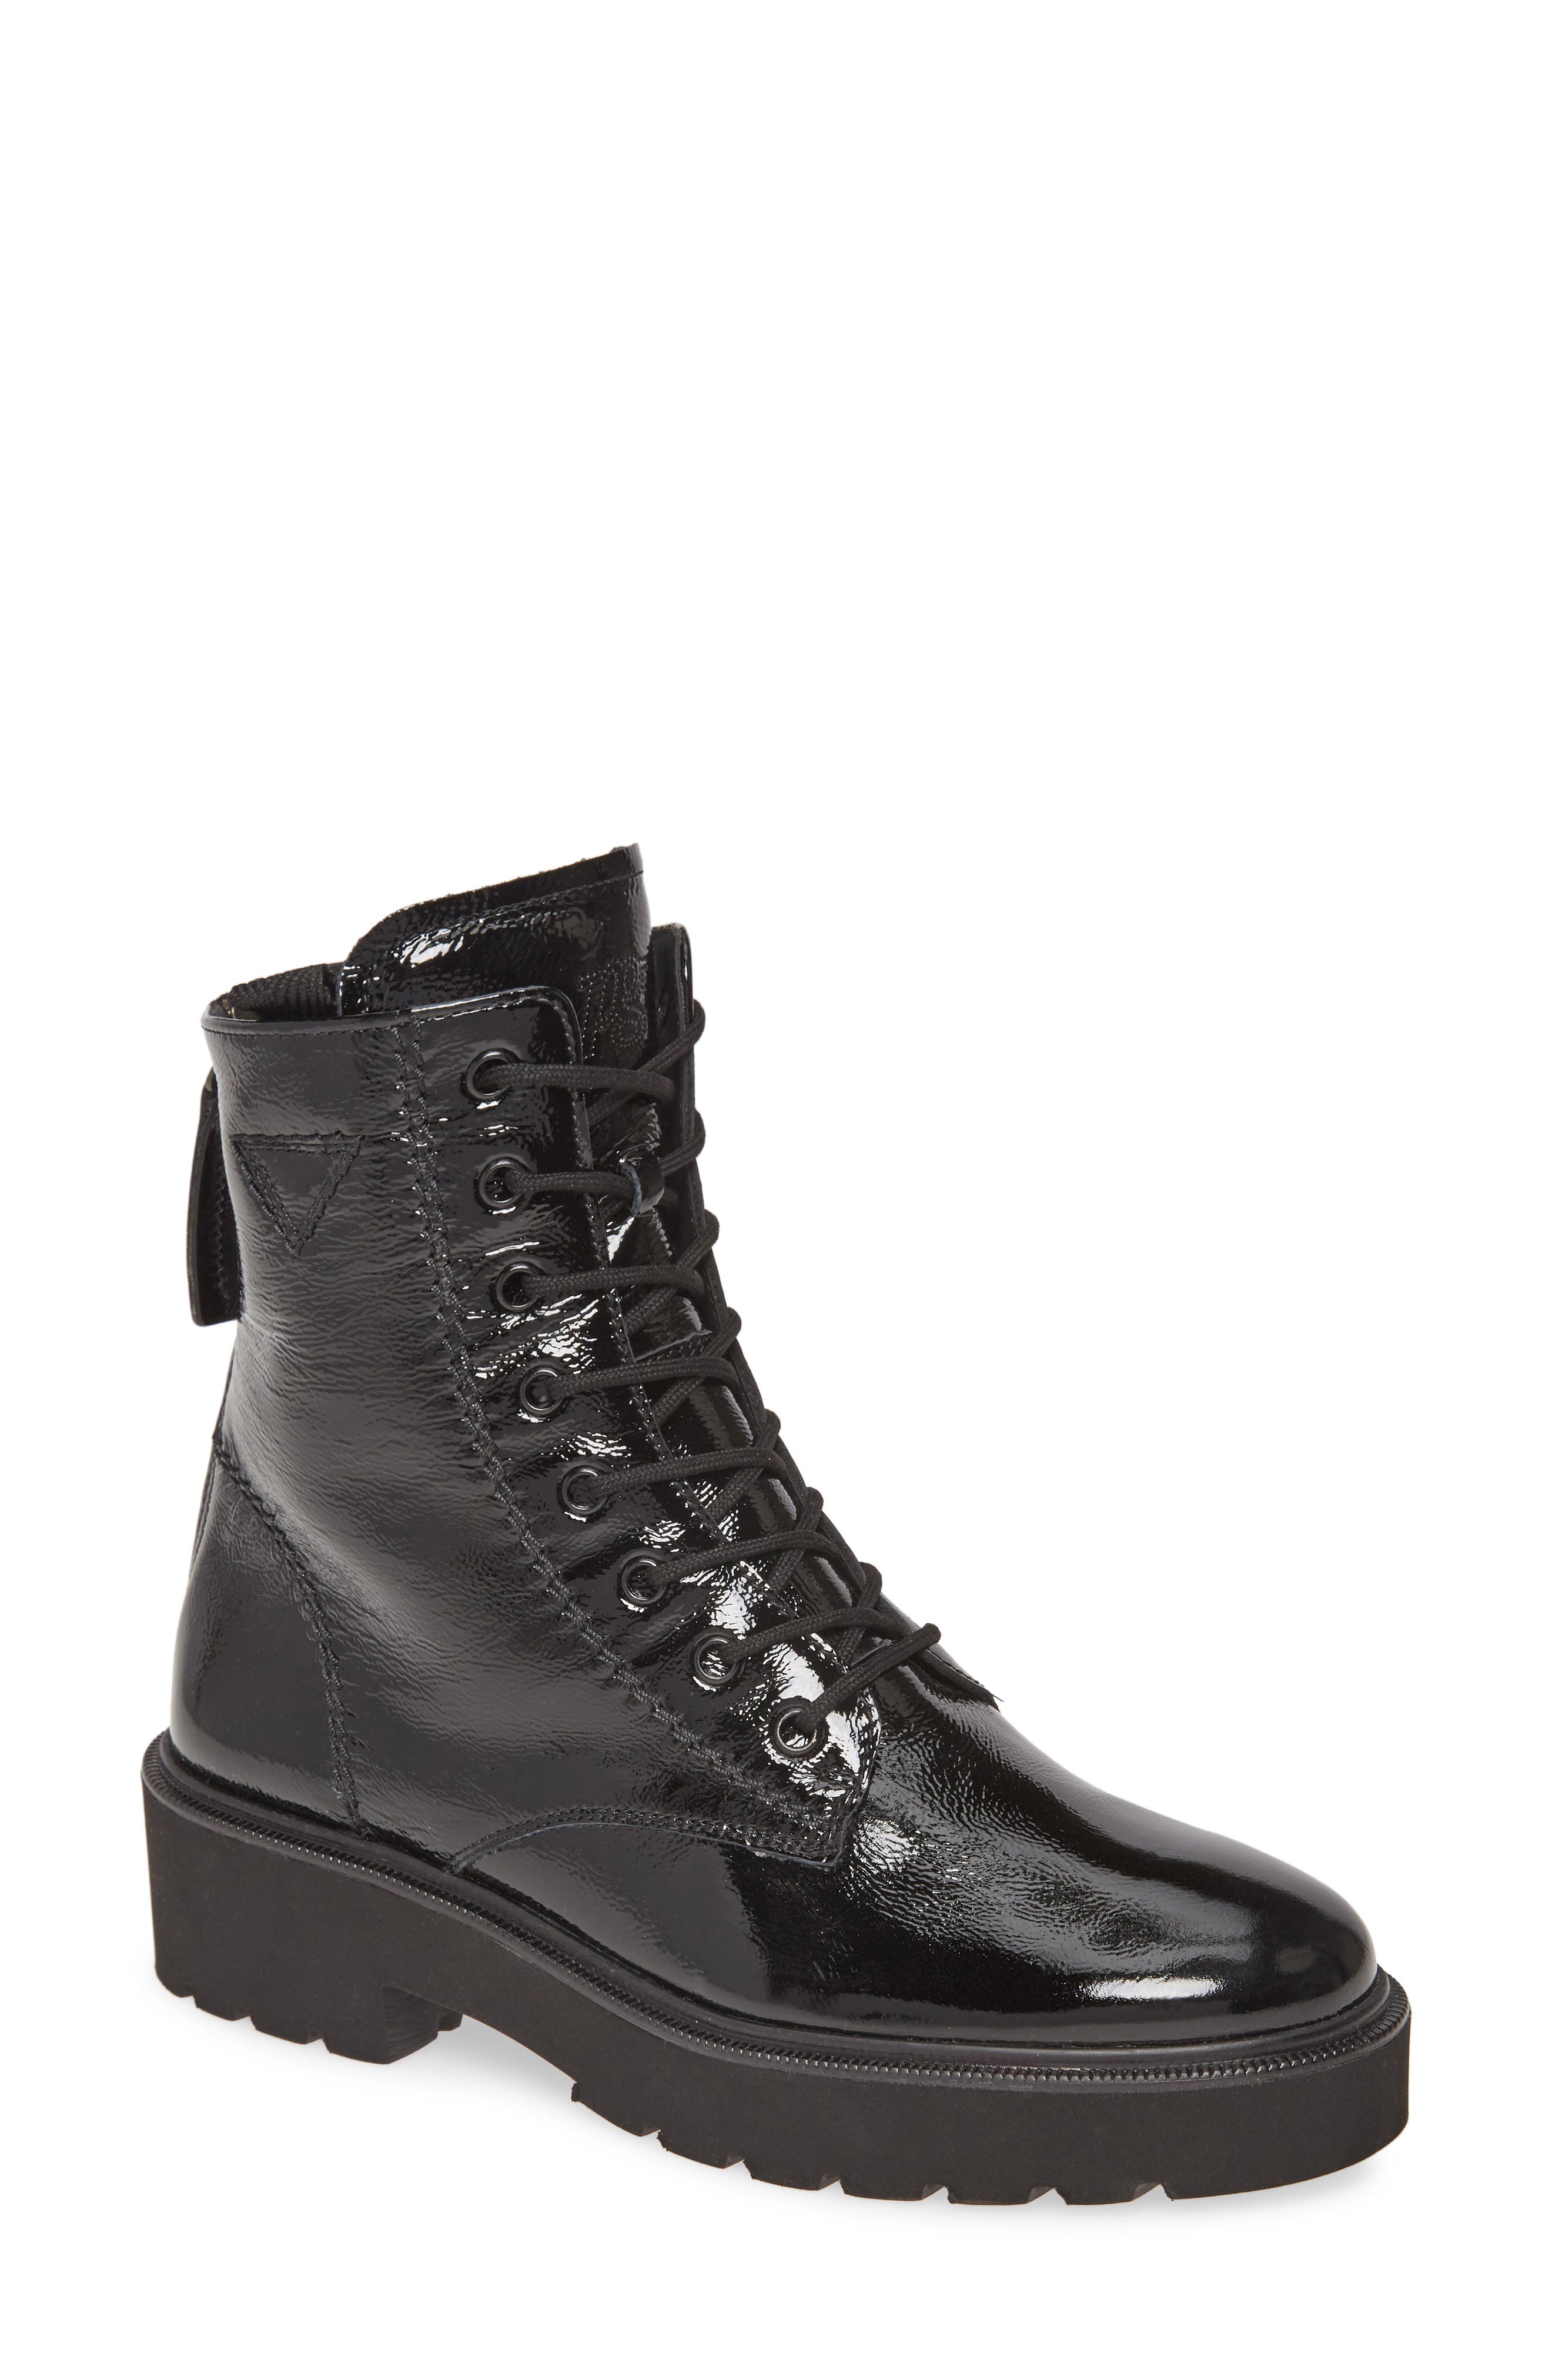 paul green lace up booties